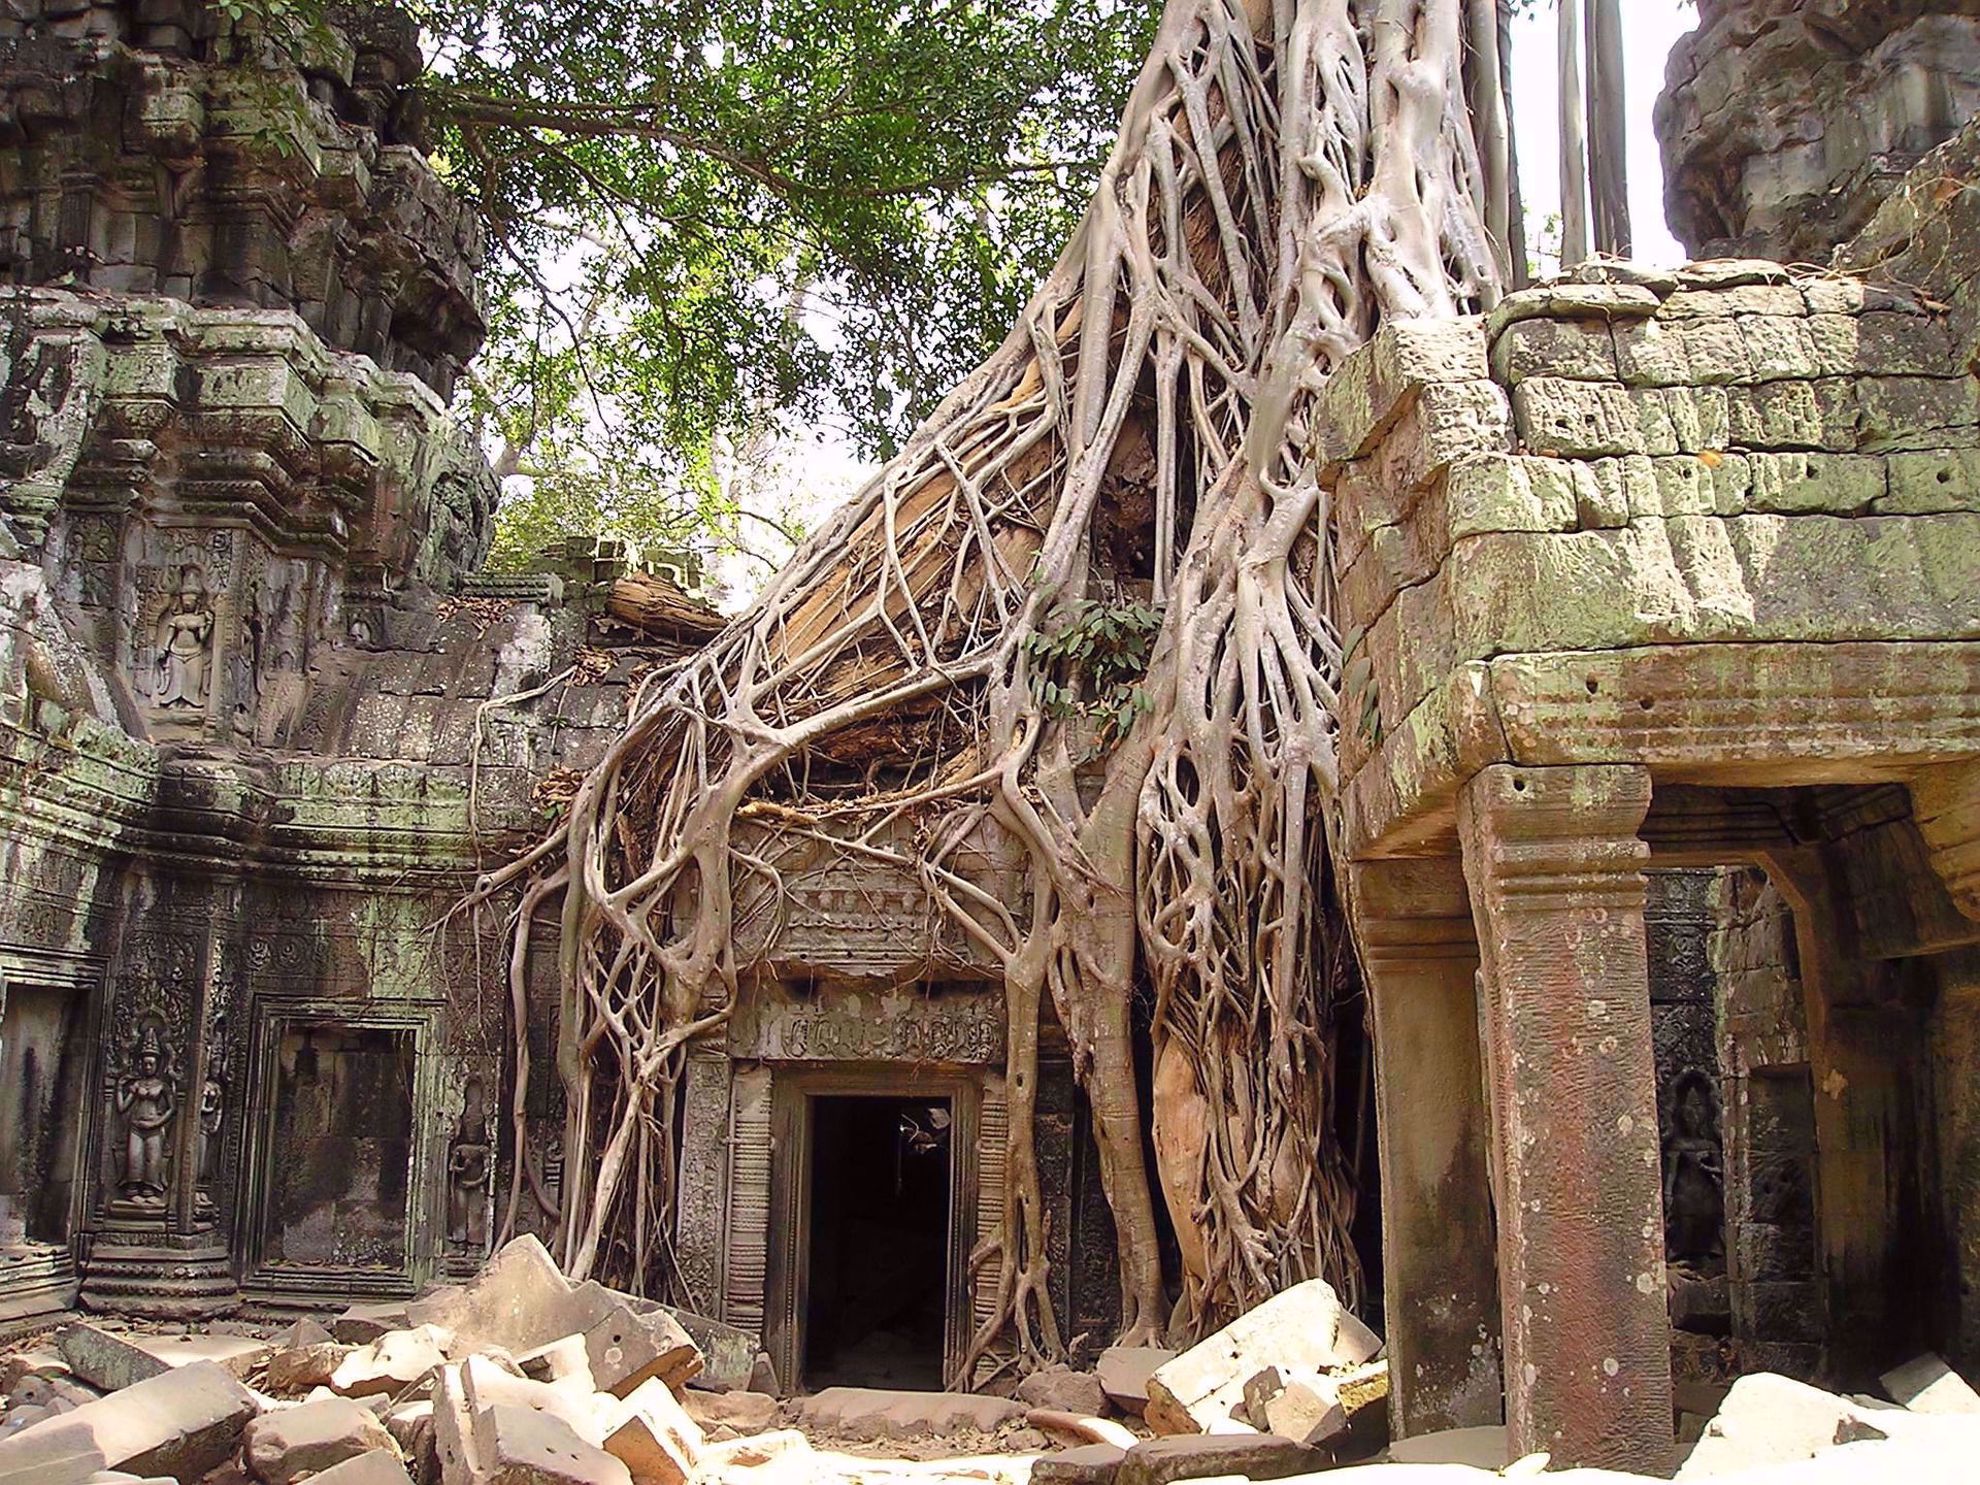 Temple enveloped by tree